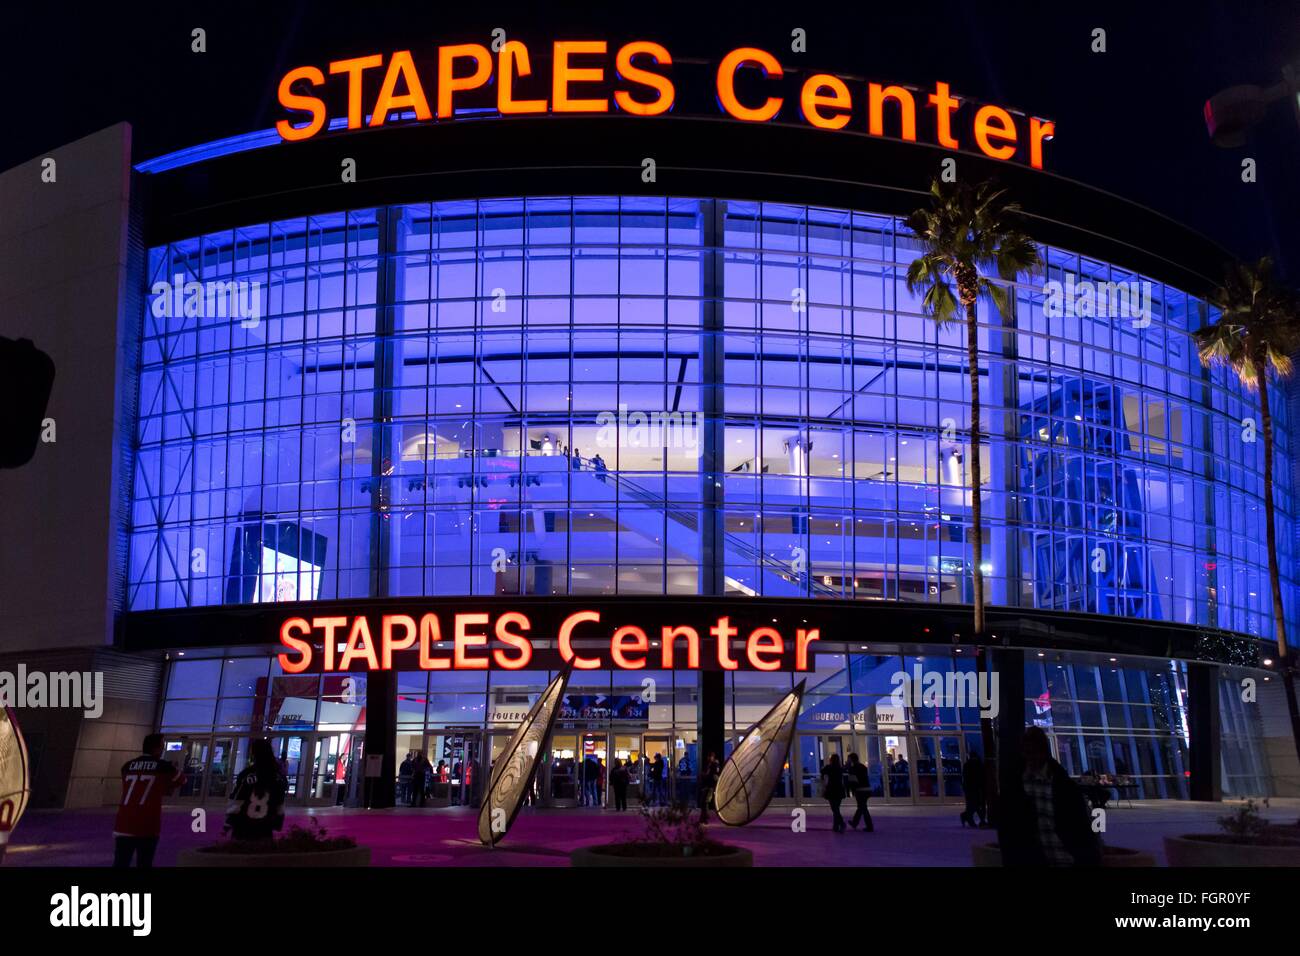 The illuminated Staples Center, a multi-purpose sports arena in Los Angeles, in December 2015. Stock Photo